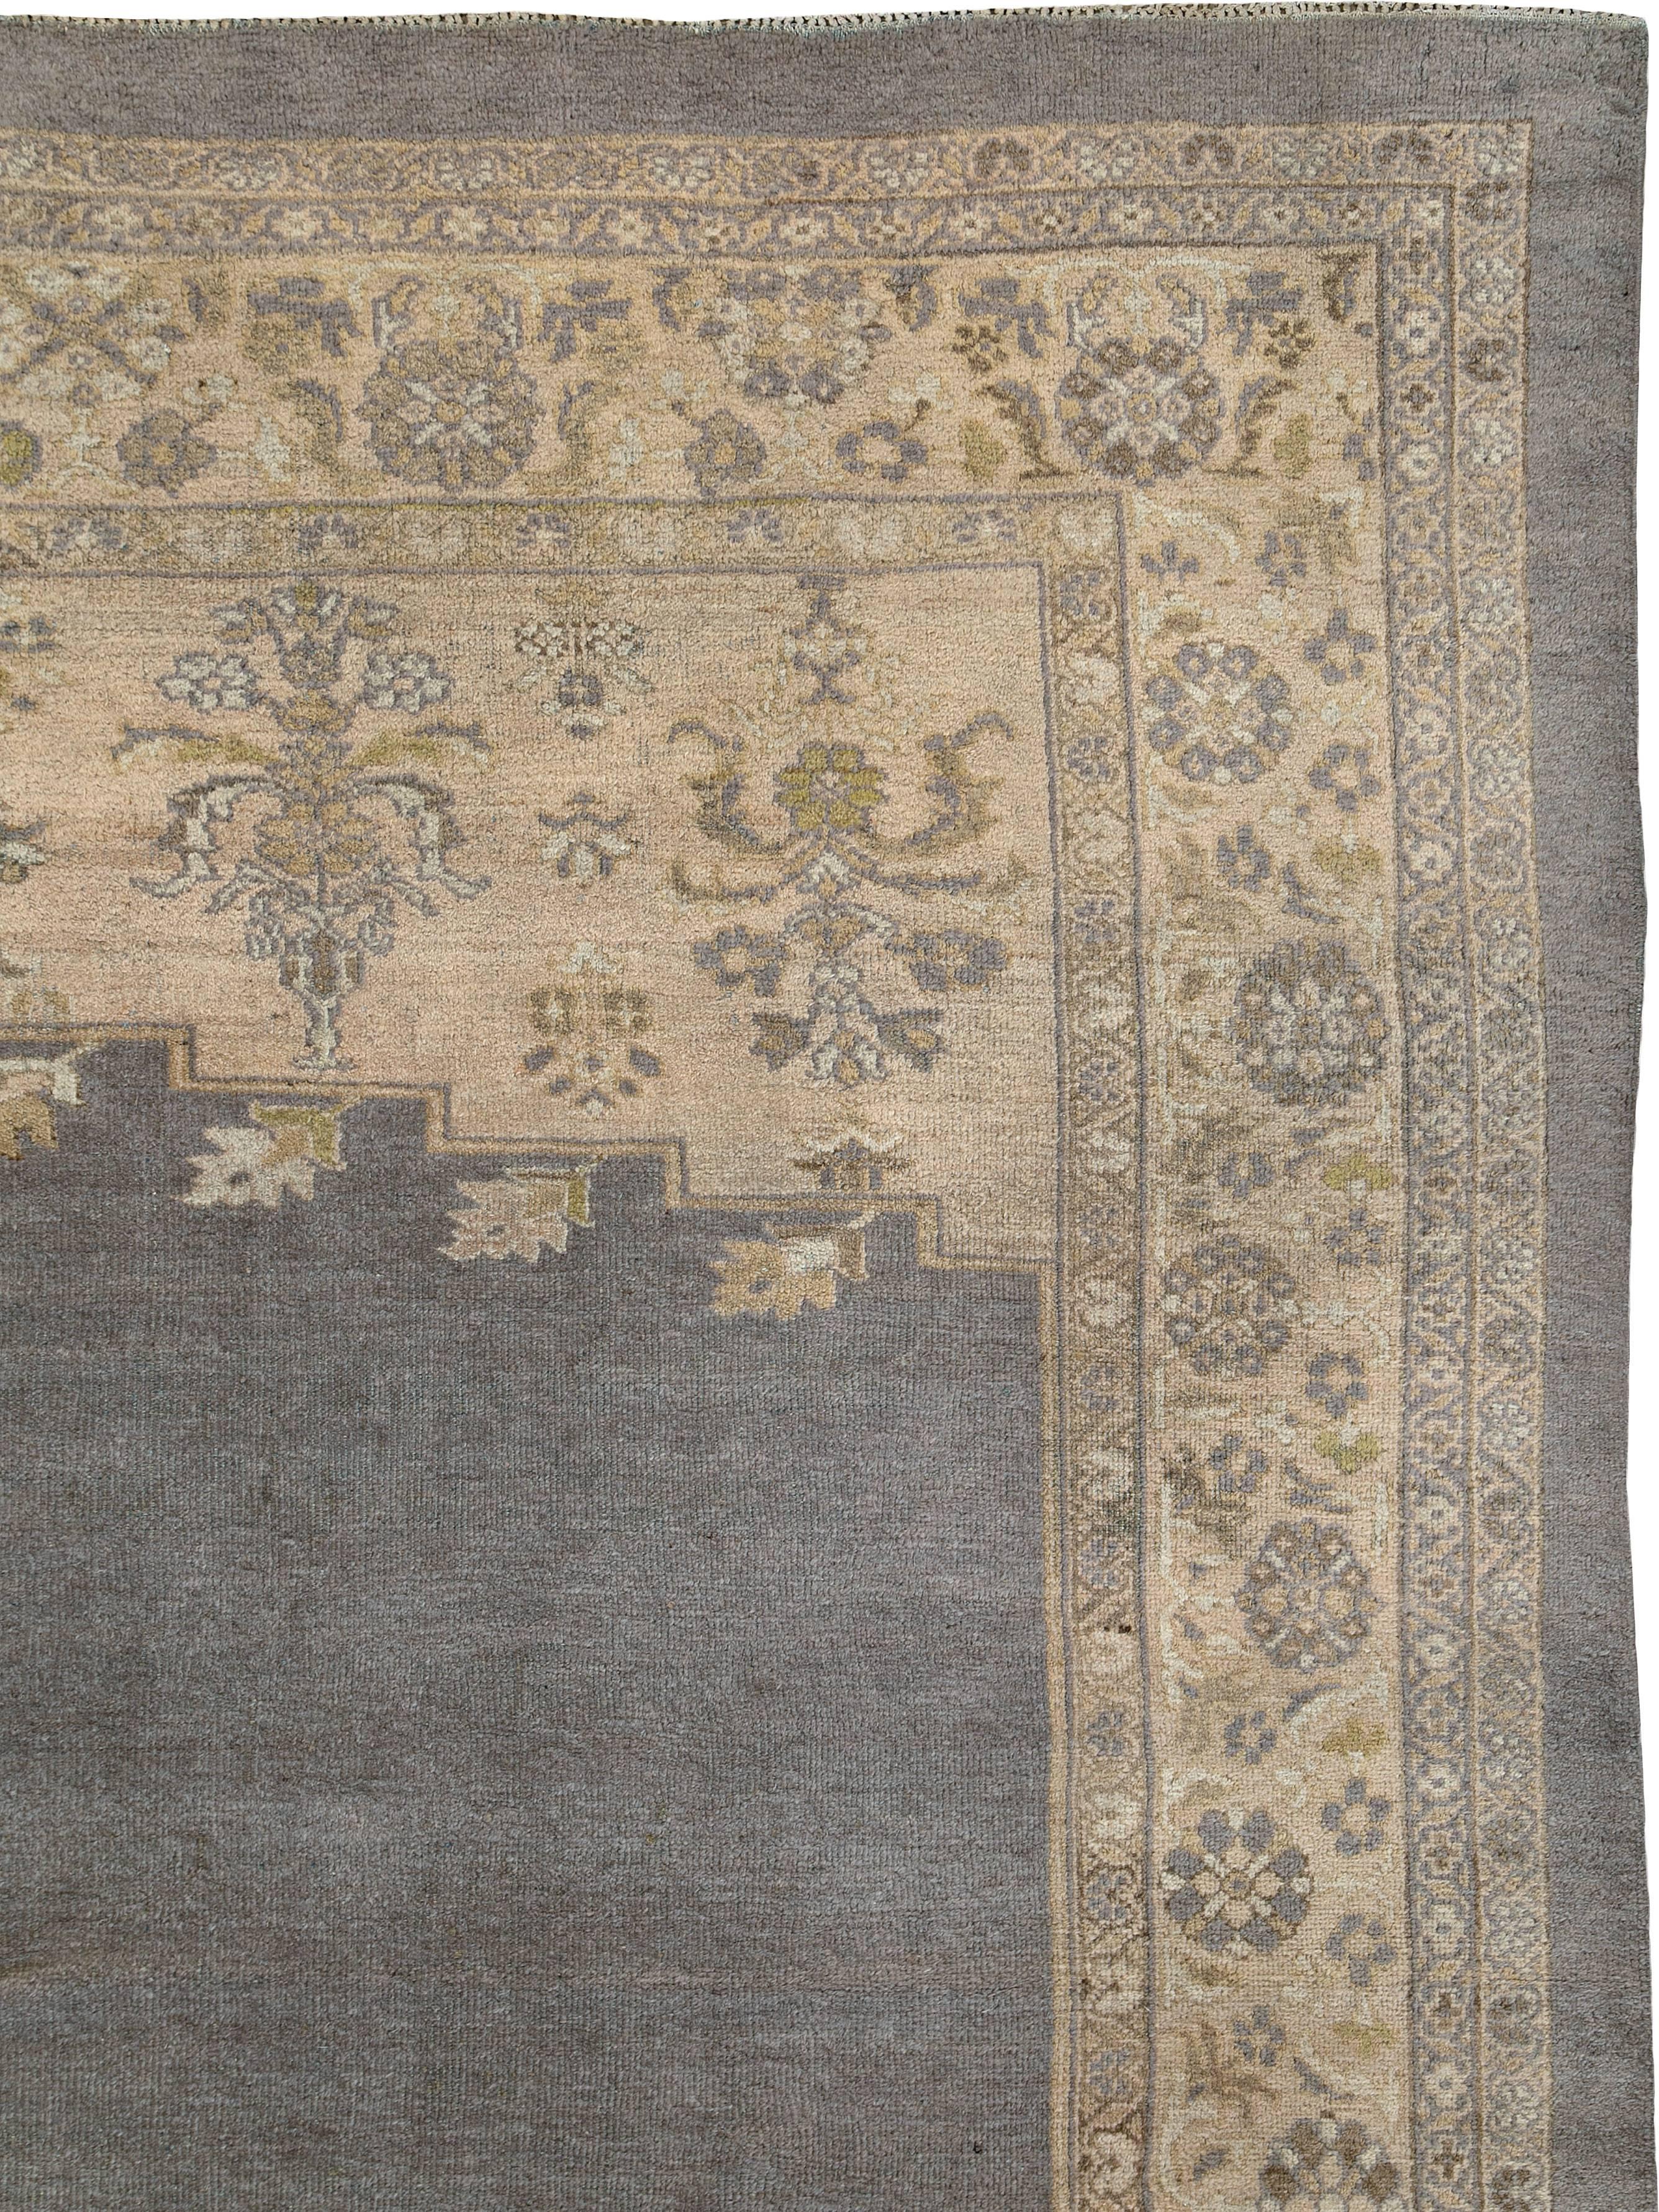 Sultanabad Antique Persian Mahal Rug